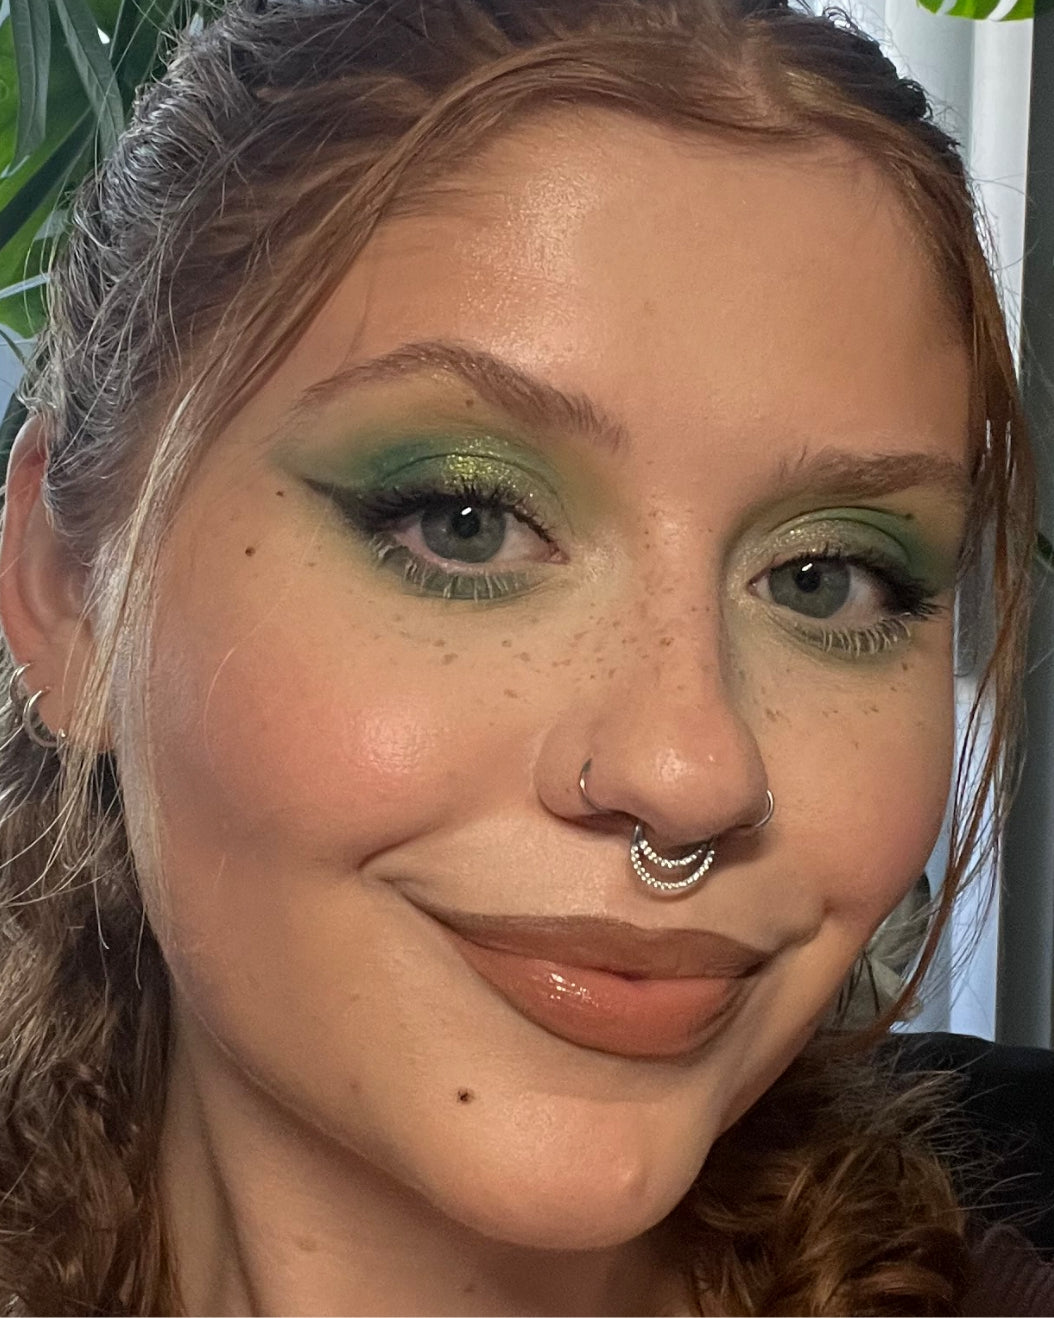 Makeup artist wears a matcha latte-inspired makeup look with shimmery green eyeshadow and nude-brown lips